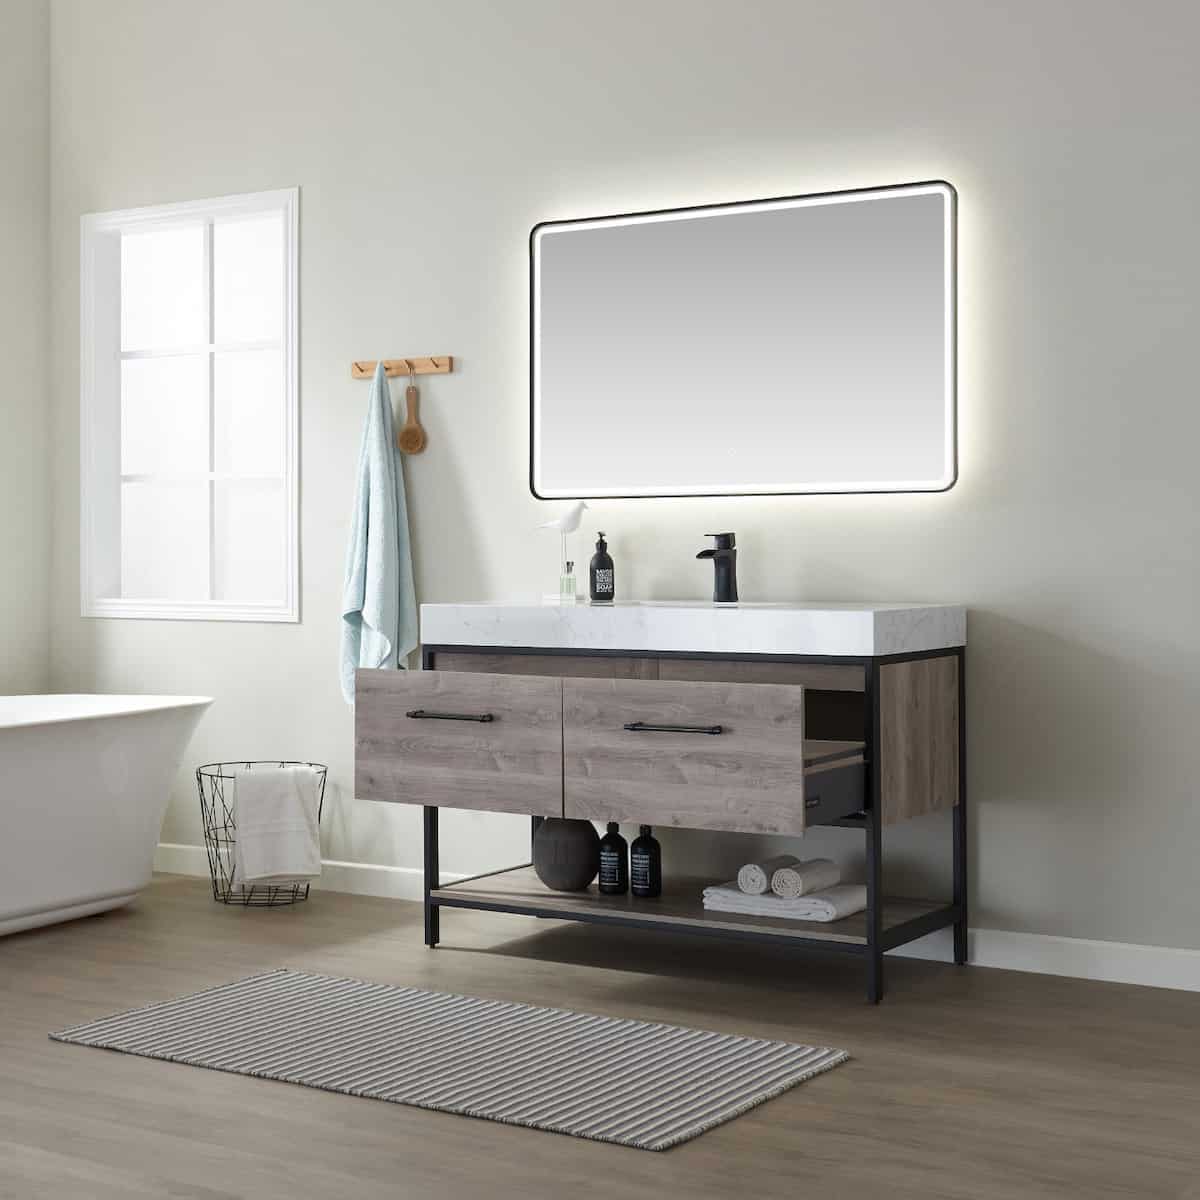 Vinnova Palma 48 Inch Freestanding Single Vanity In Mexican Oak with White Composite Grain Stone Countertop With Mirror Drawers 701248-MXO-GW